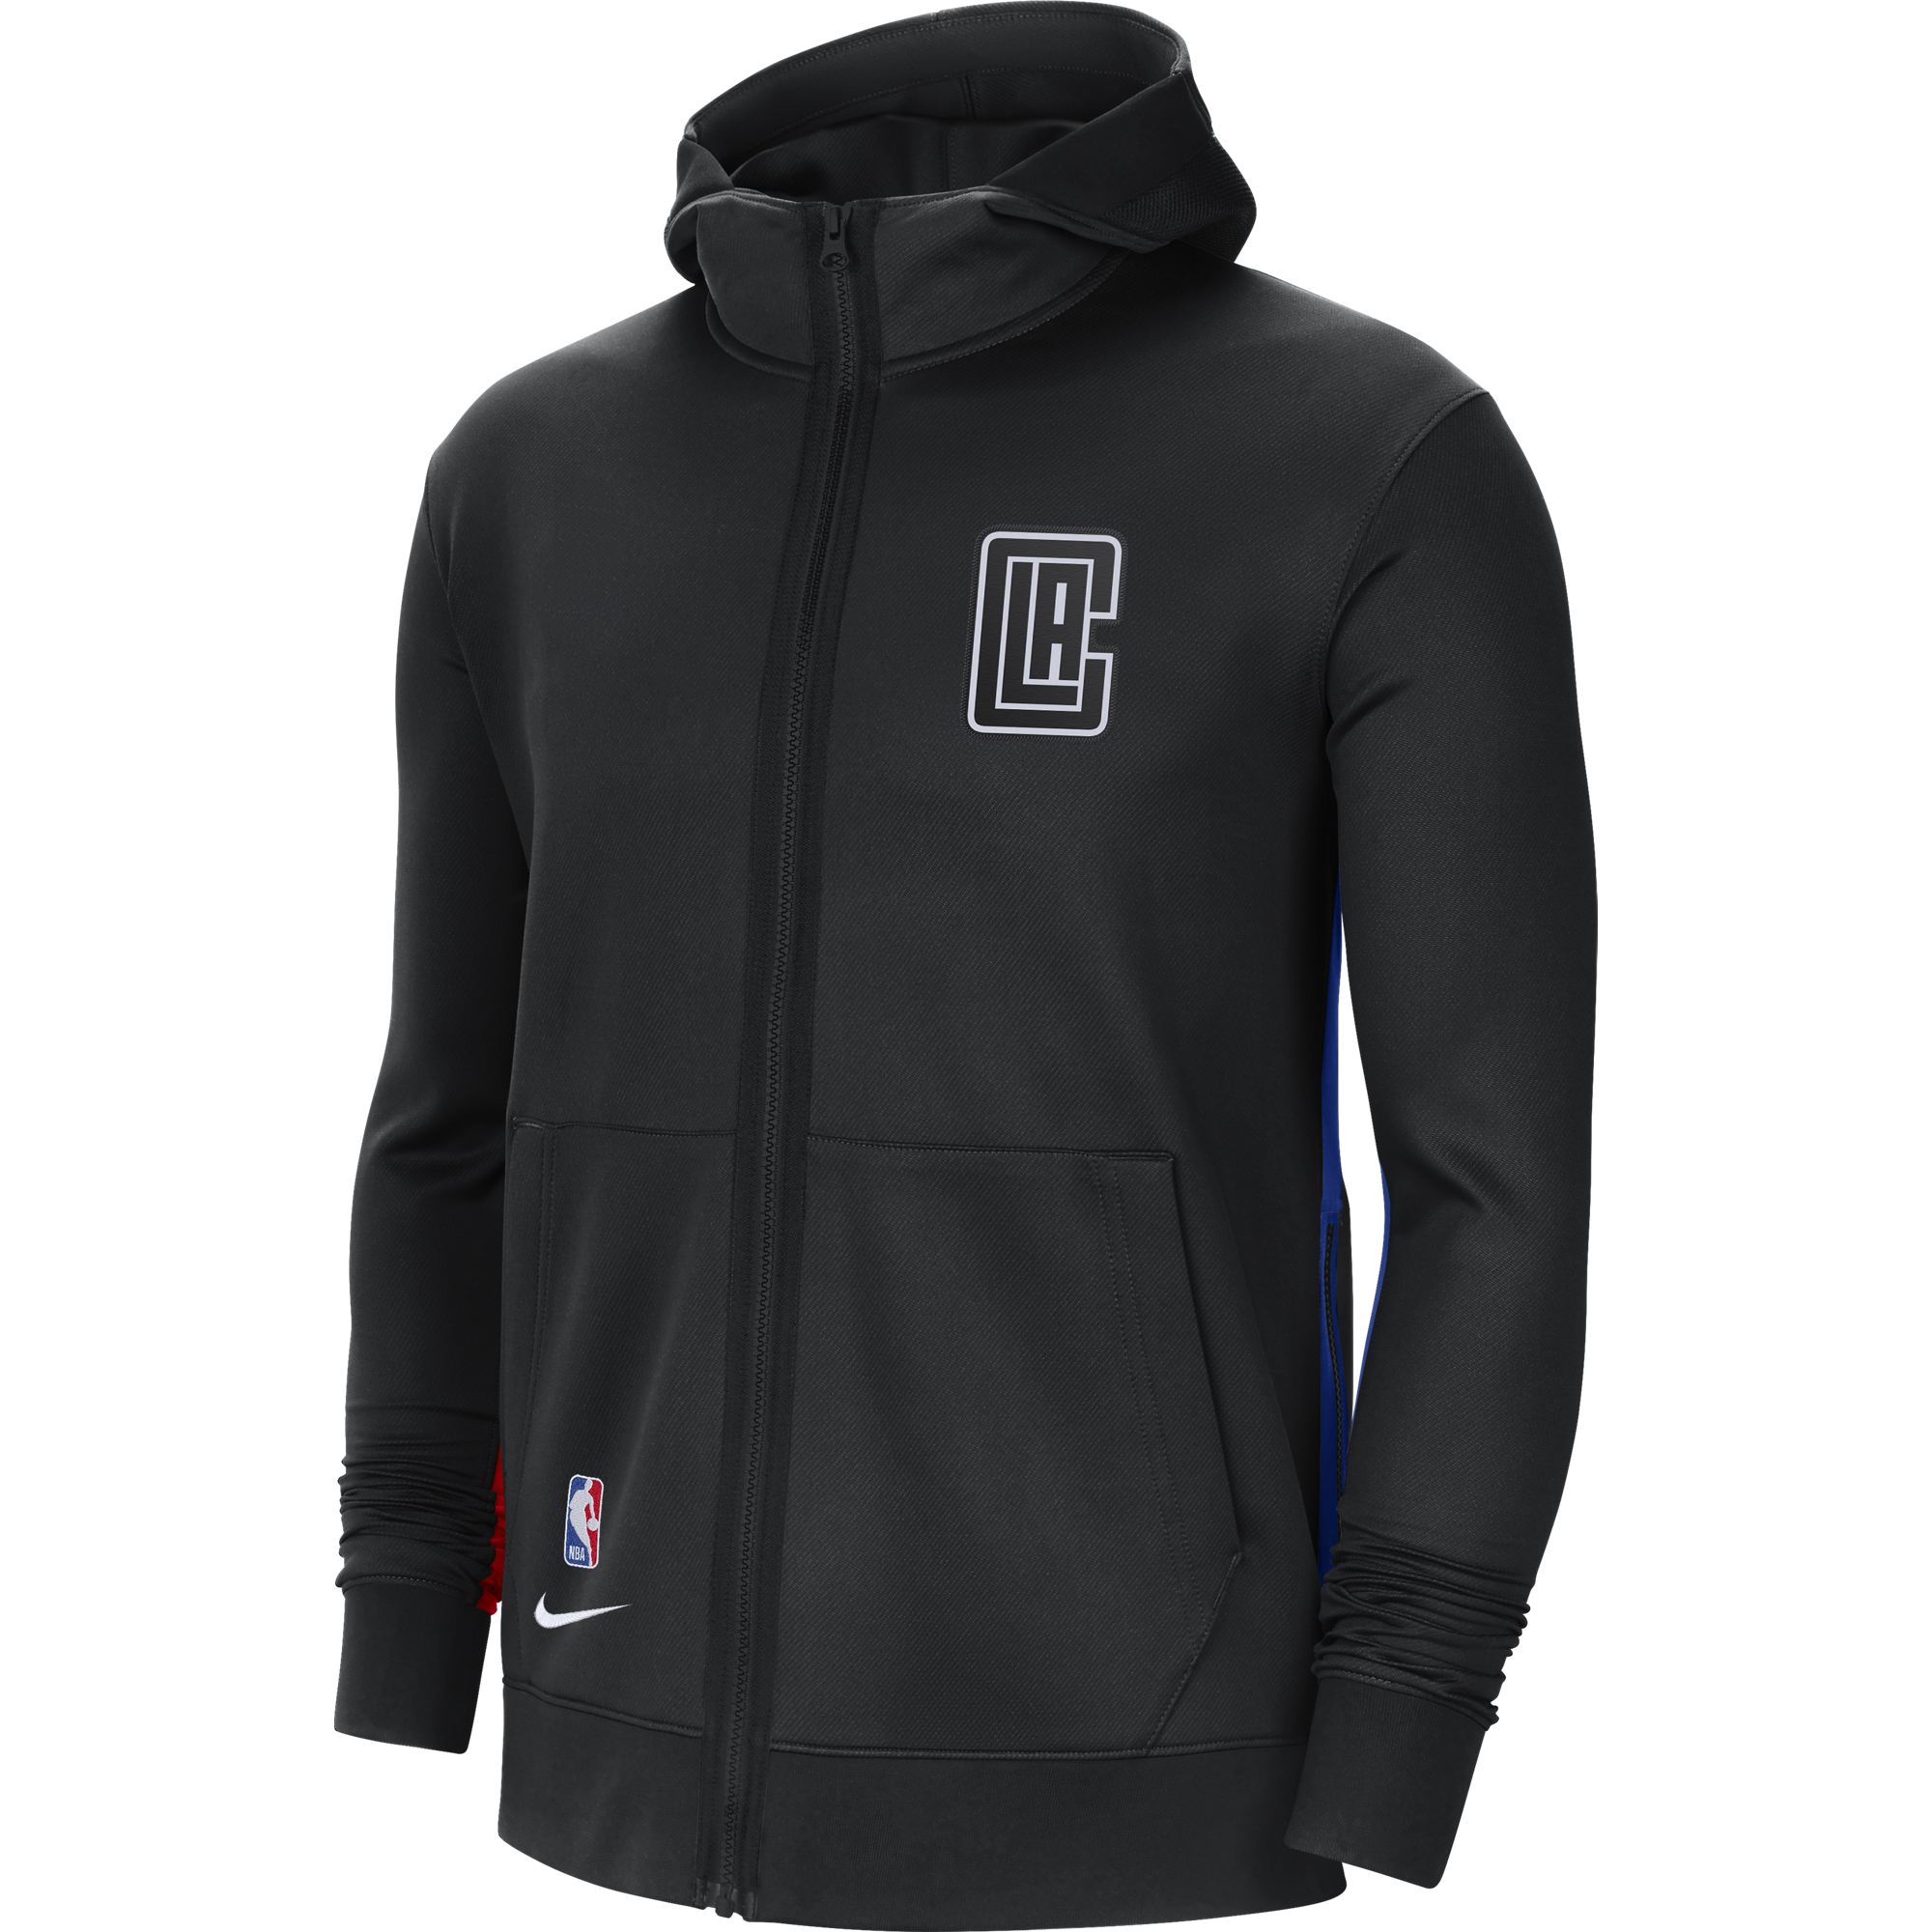 NIKE NBA LOS ANGELES CLIPPERS SHOWTIME CITY EDITION THERMA FLEX HOODIE BLACK